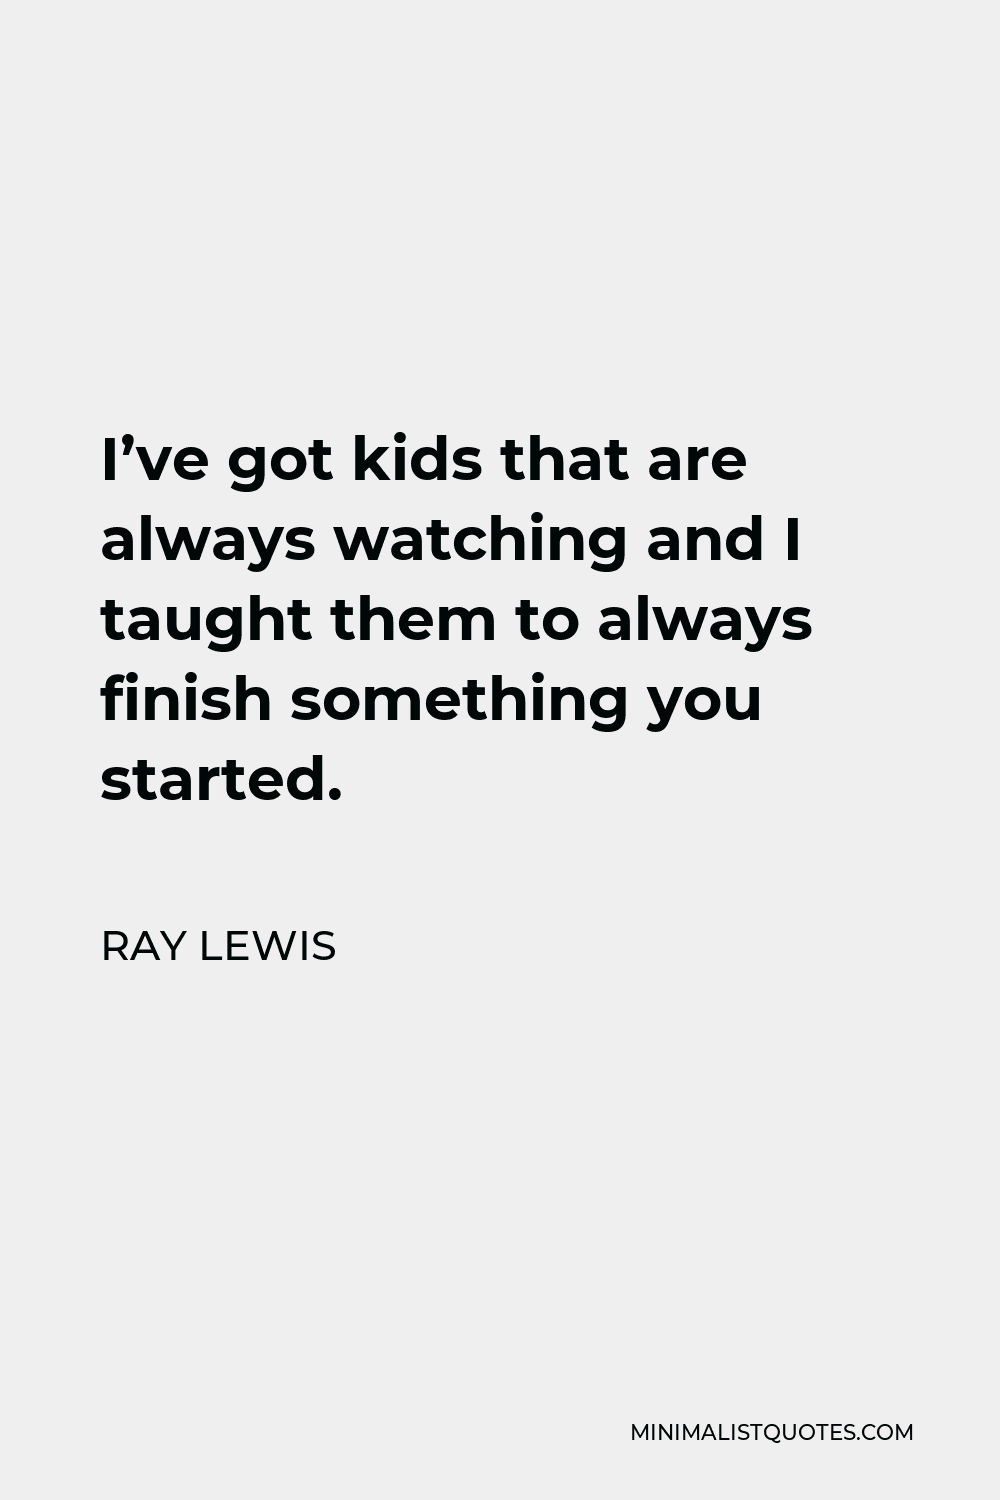 Ray Lewis Quote - I’ve got kids that are always watching and I taught them to always finish something you started.